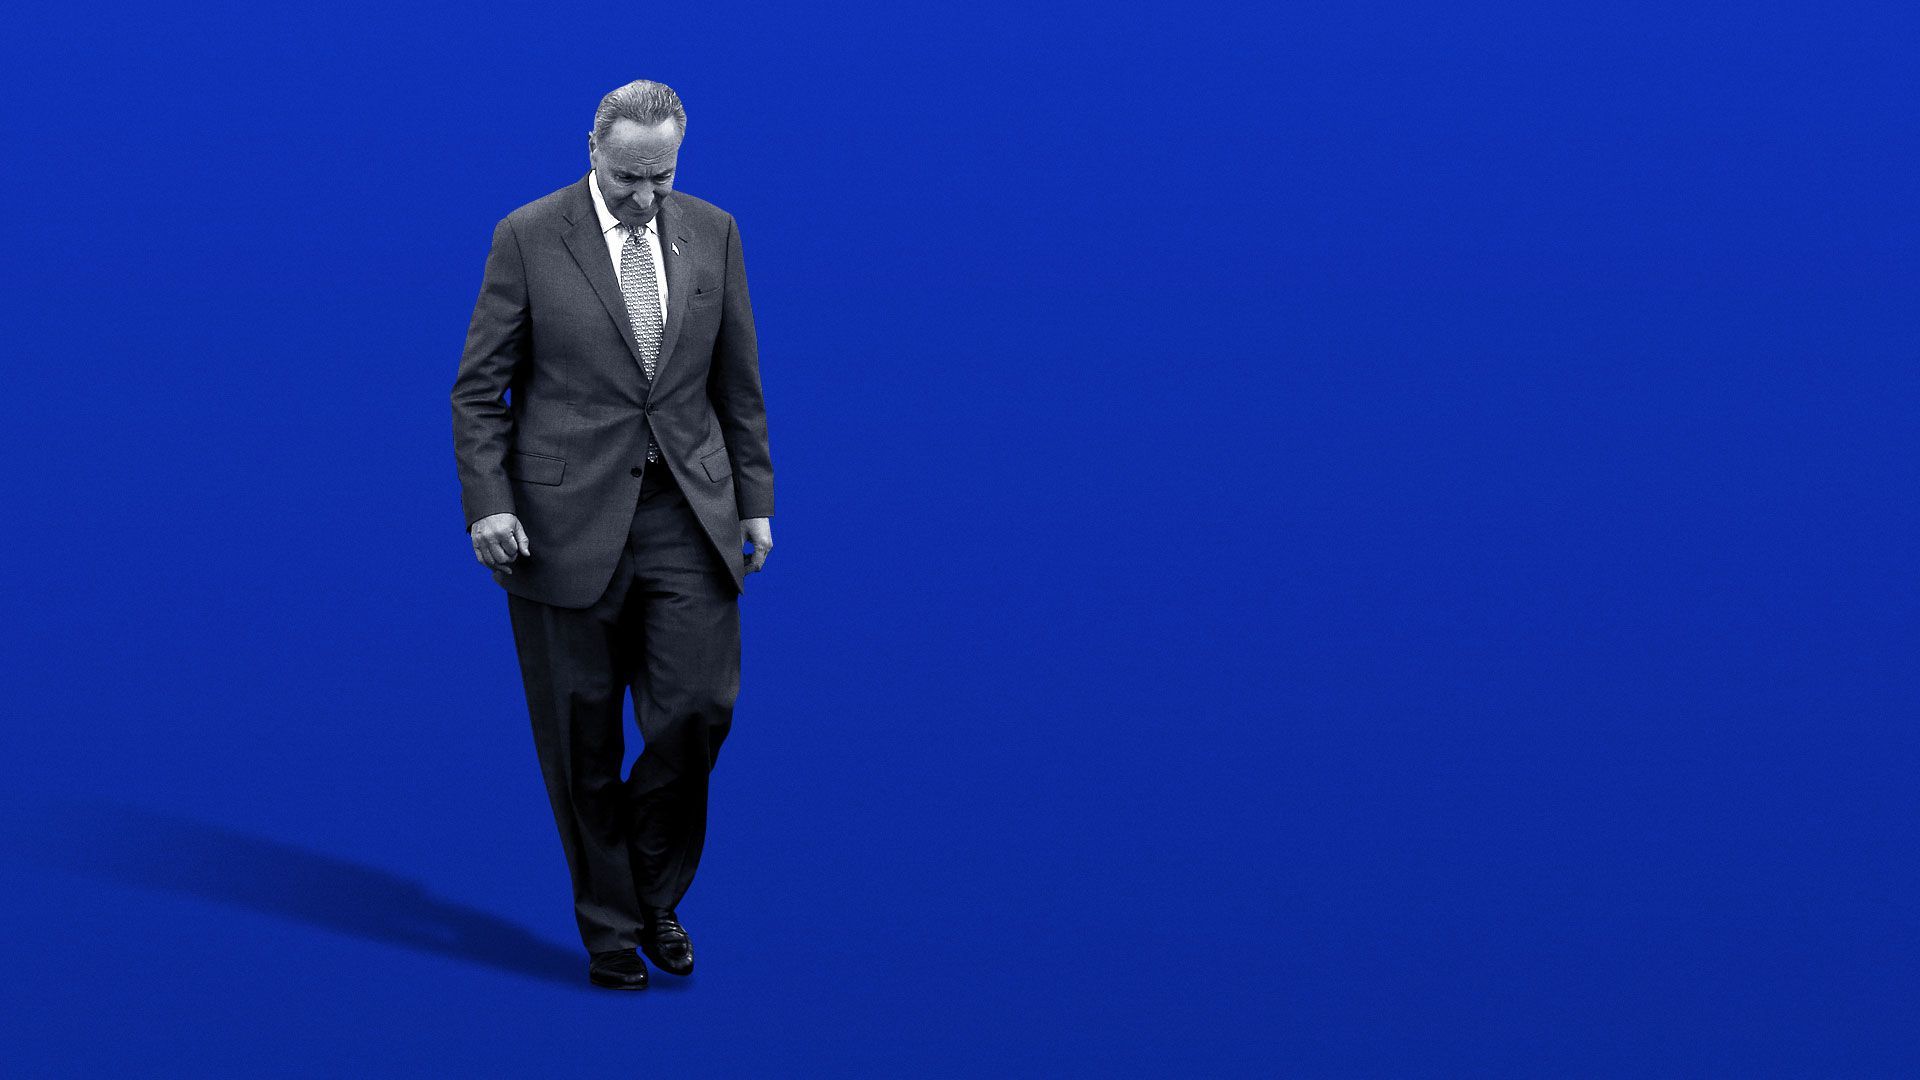 Illustration of Chuck Schumer looking down casting a long shadow